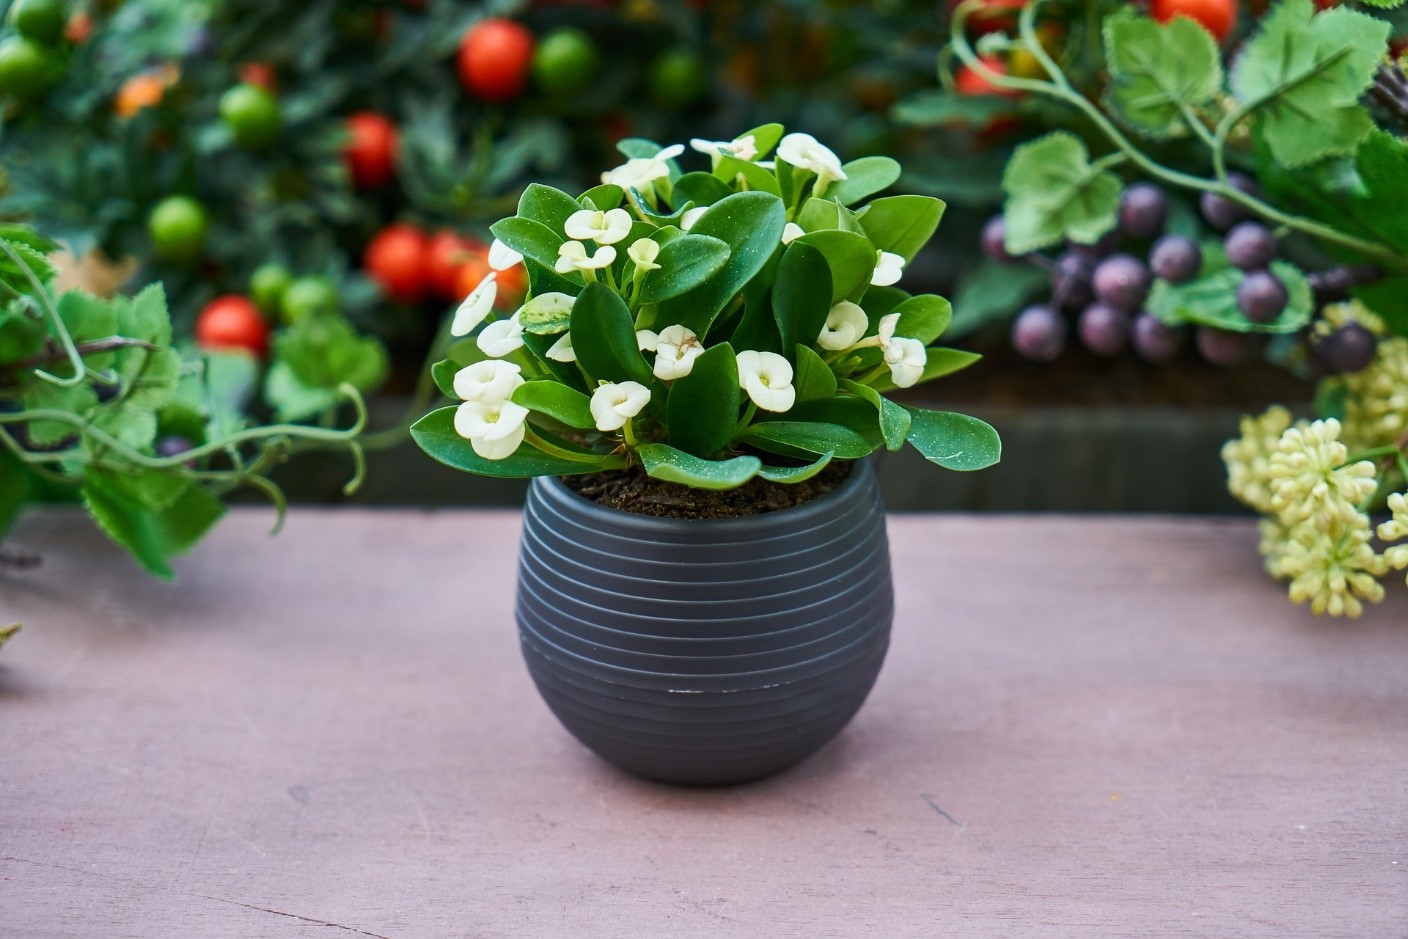 Plant Delivery: What You Should Know About Buying Plants Online